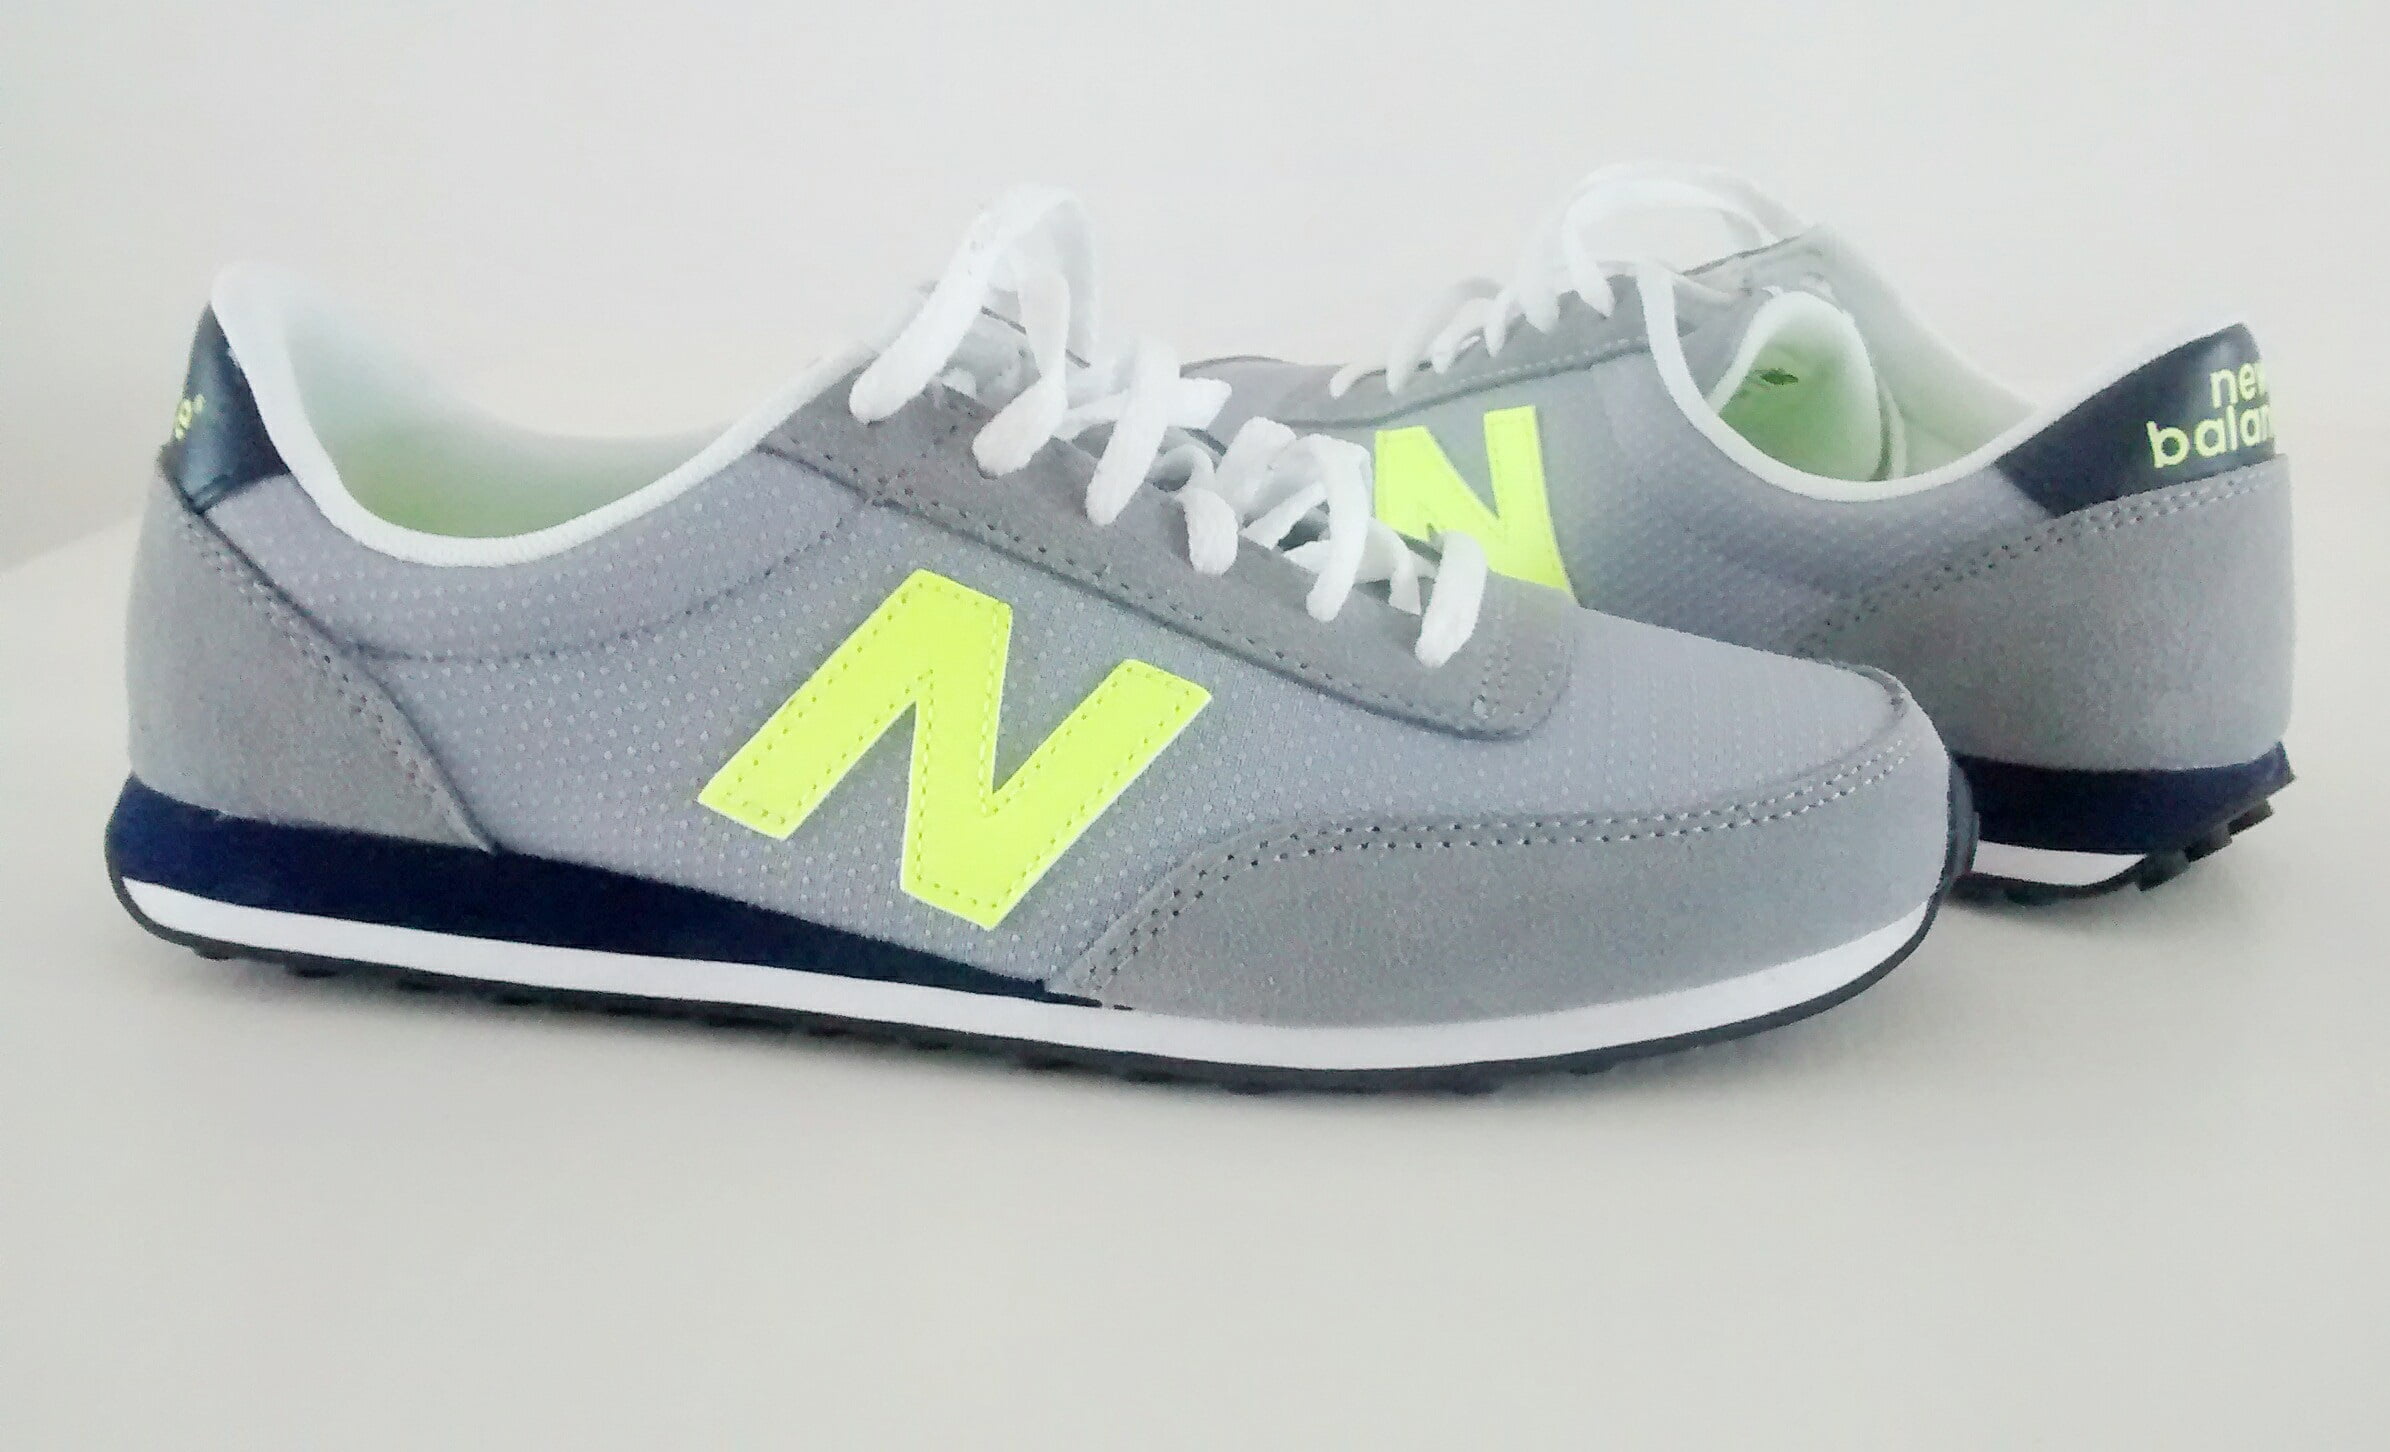 pair of gray-and-green New Balance running shoes